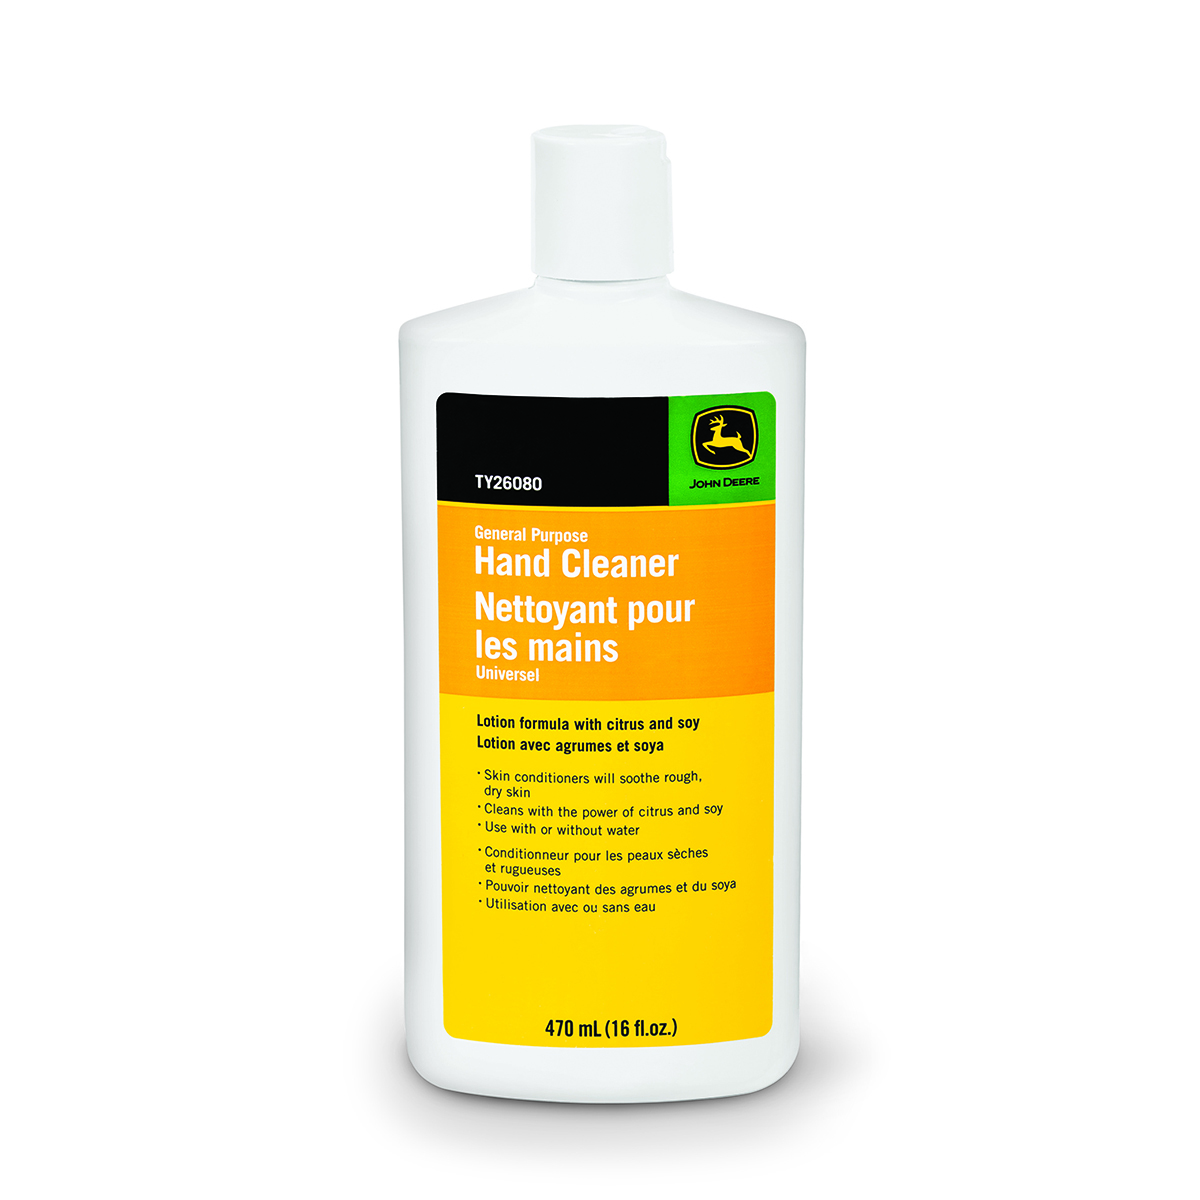 Hand Cleaner with Citrus and Soy, 16 OZ